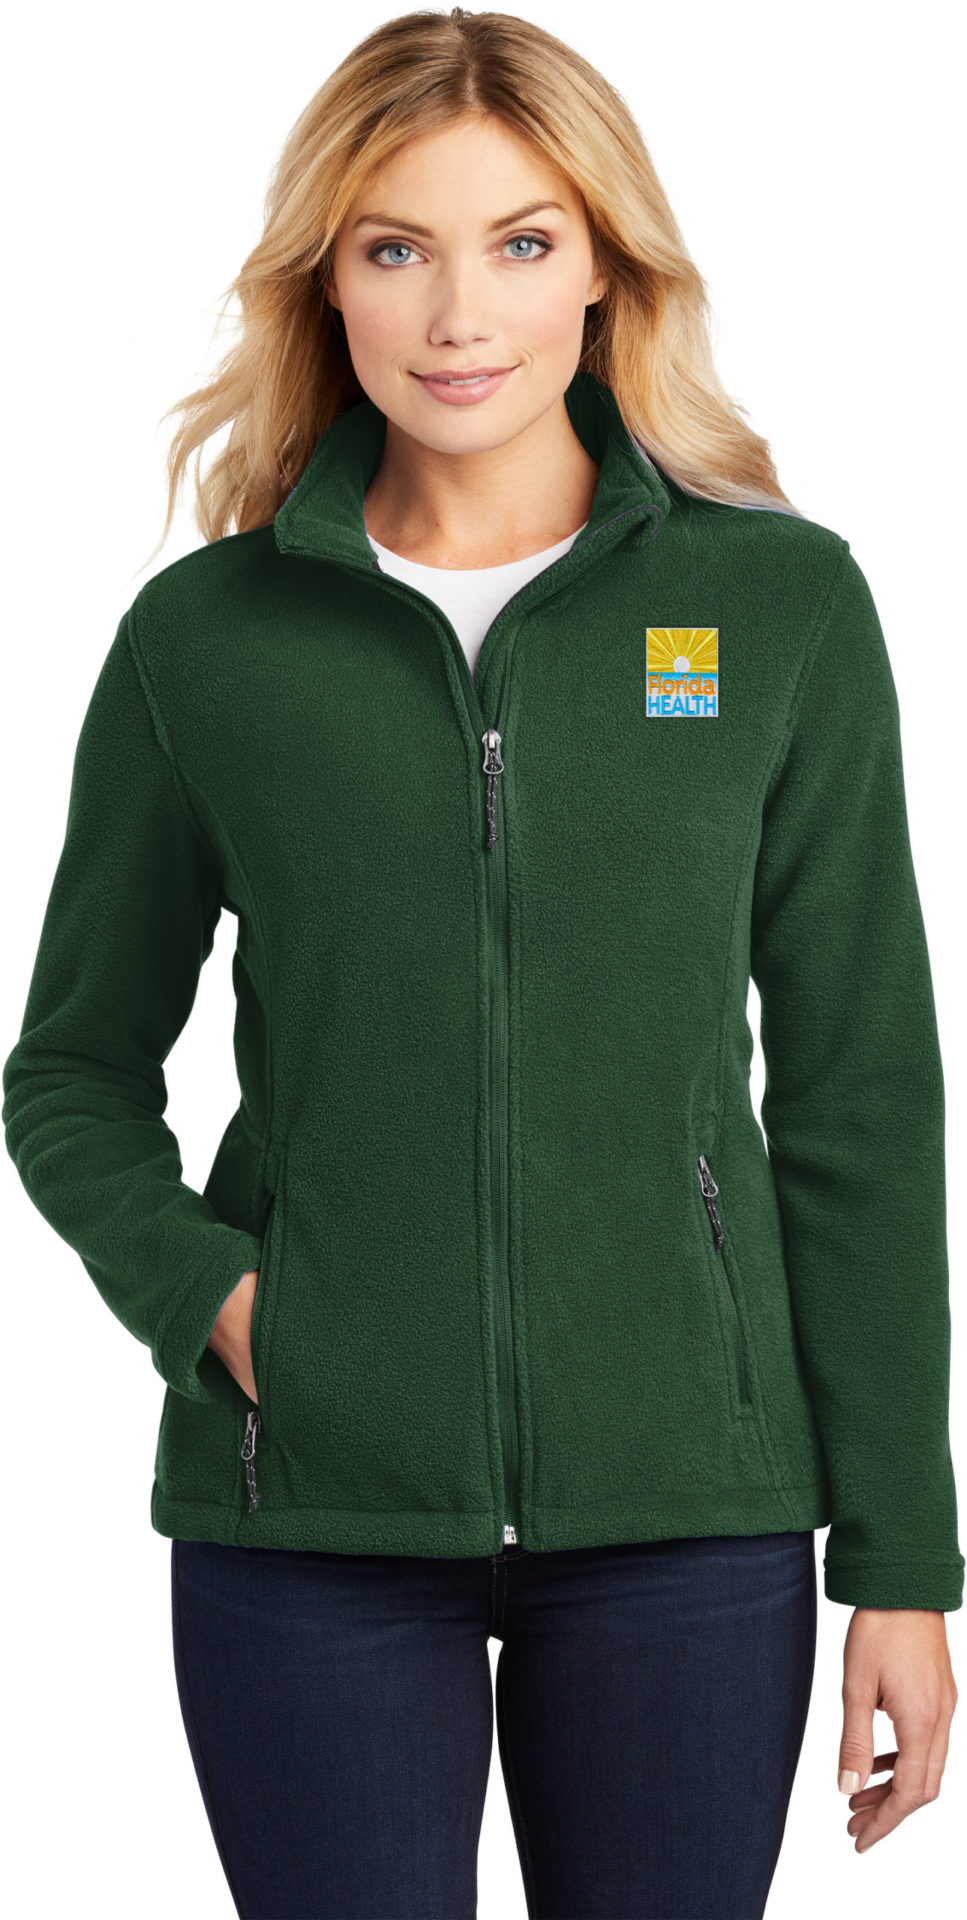 https://www.dohshirts.com/wp-content/uploads/2021/11/L217_forestgreen_model_front_102016-1-scaled.jpg